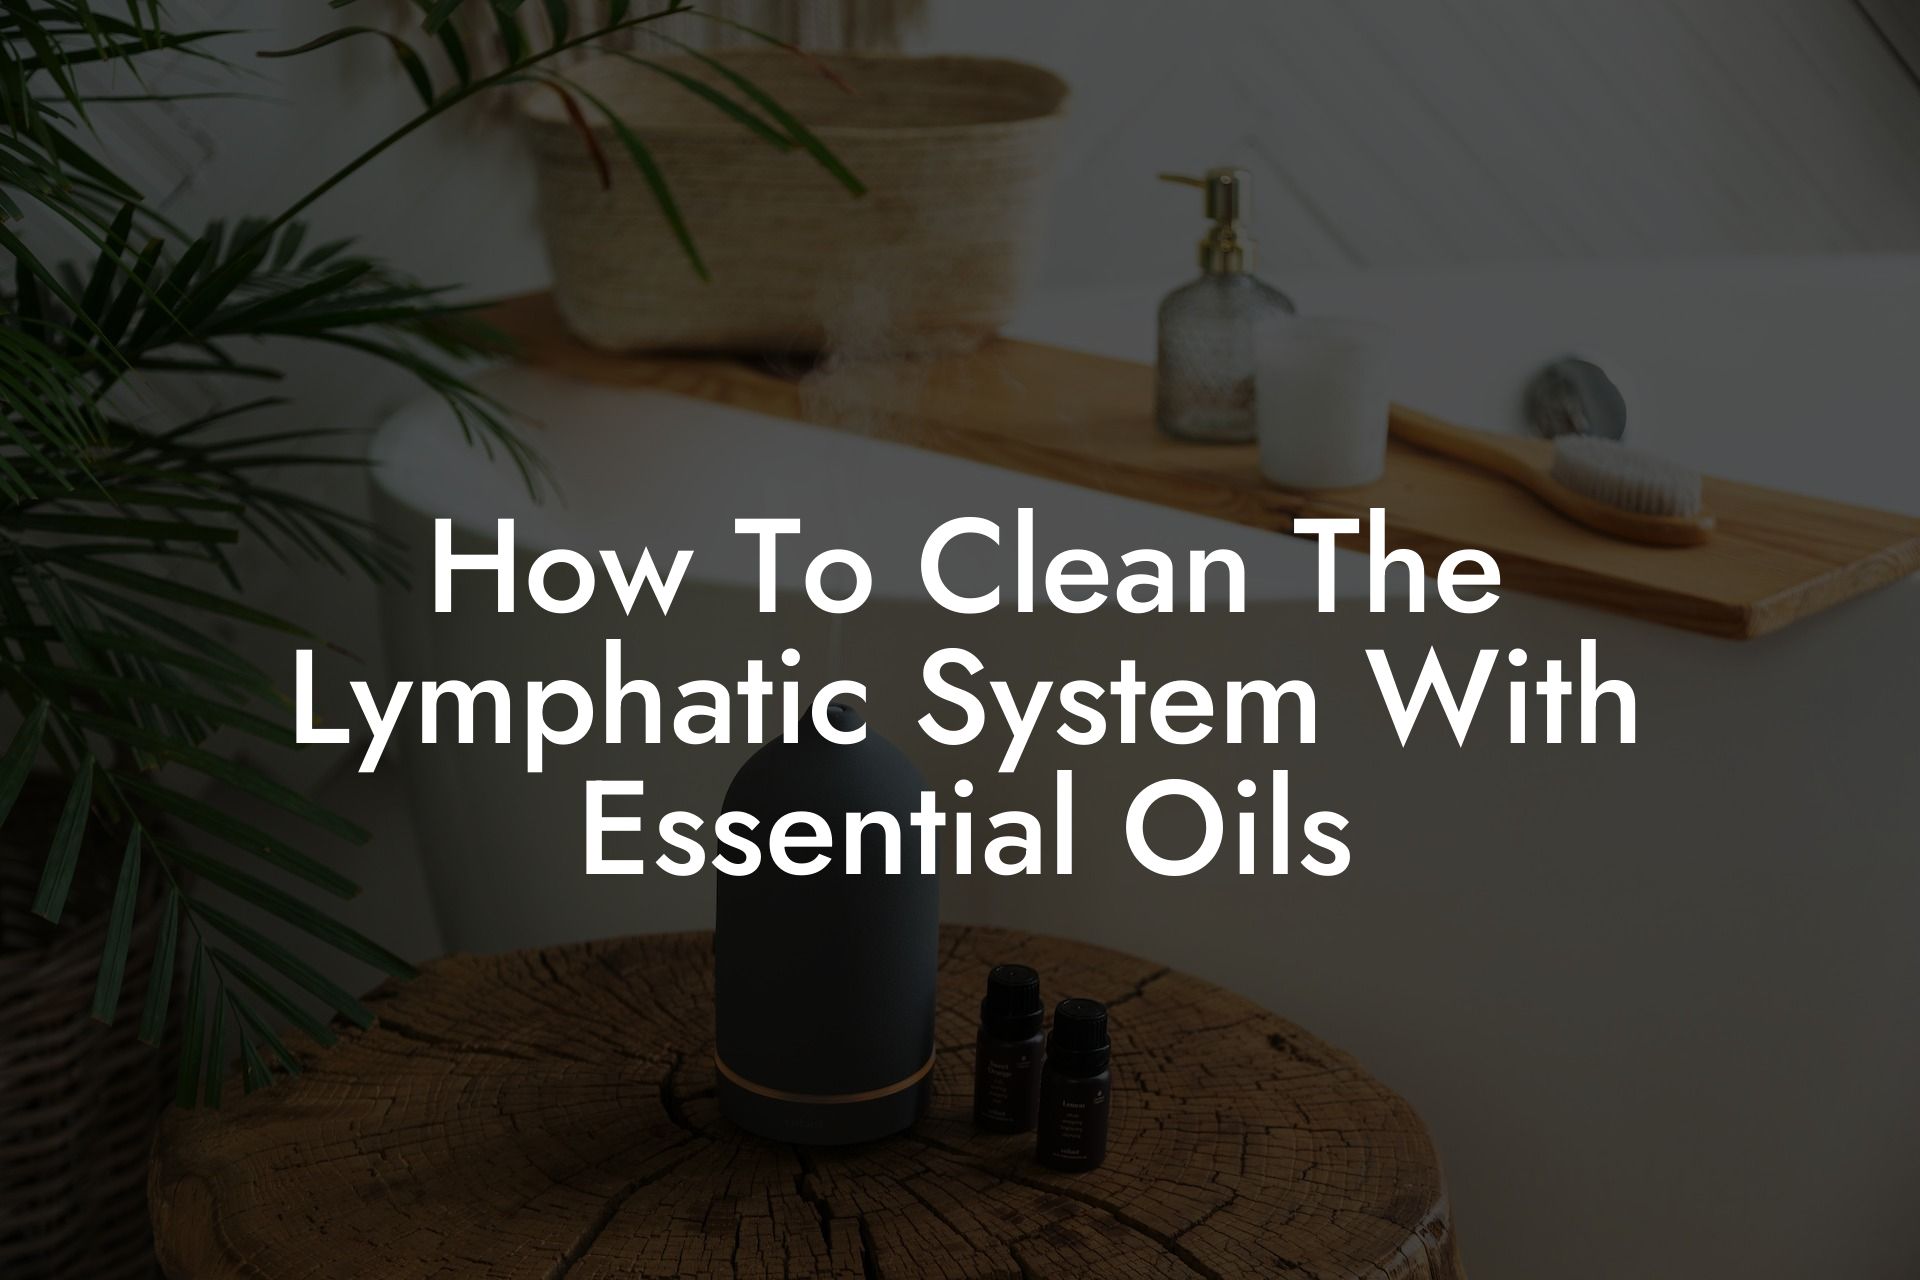 How To Clean The Lymphatic System With Essential Oils